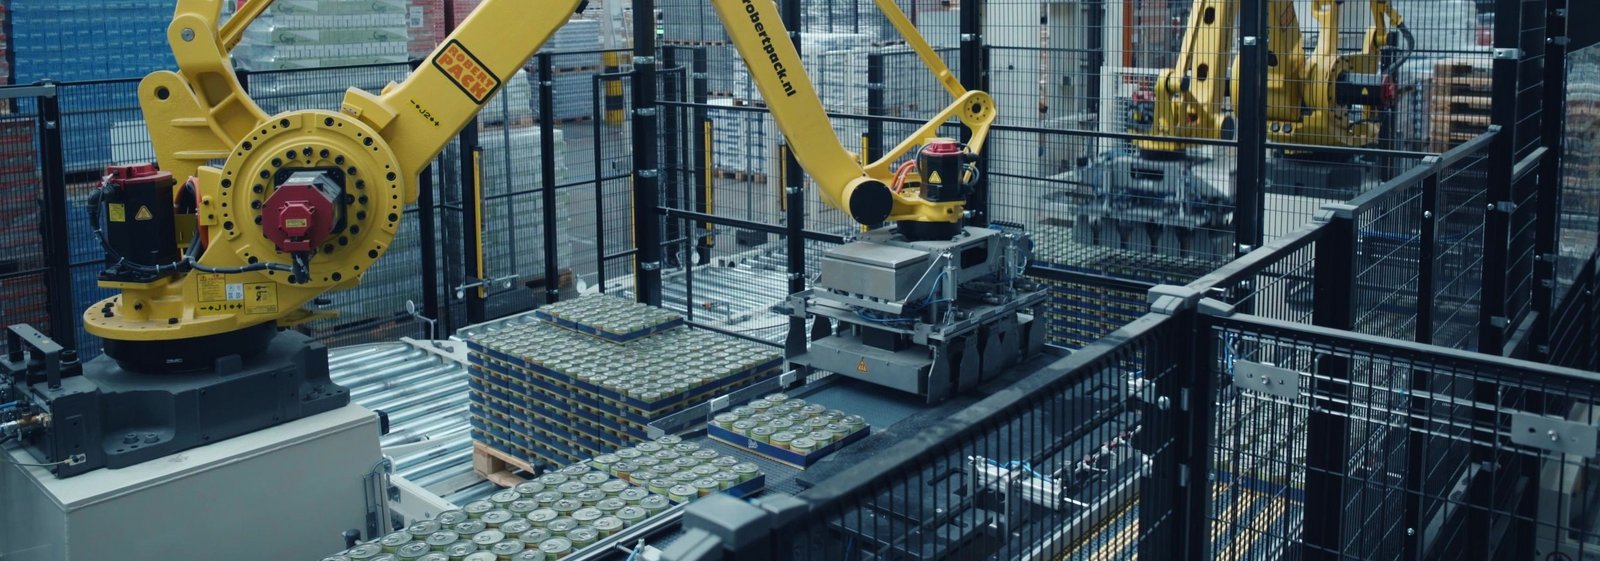 fanuc-palletising-robots-from-robertpack-Zwolle-for-palletising-trays-with-cans-cat-food